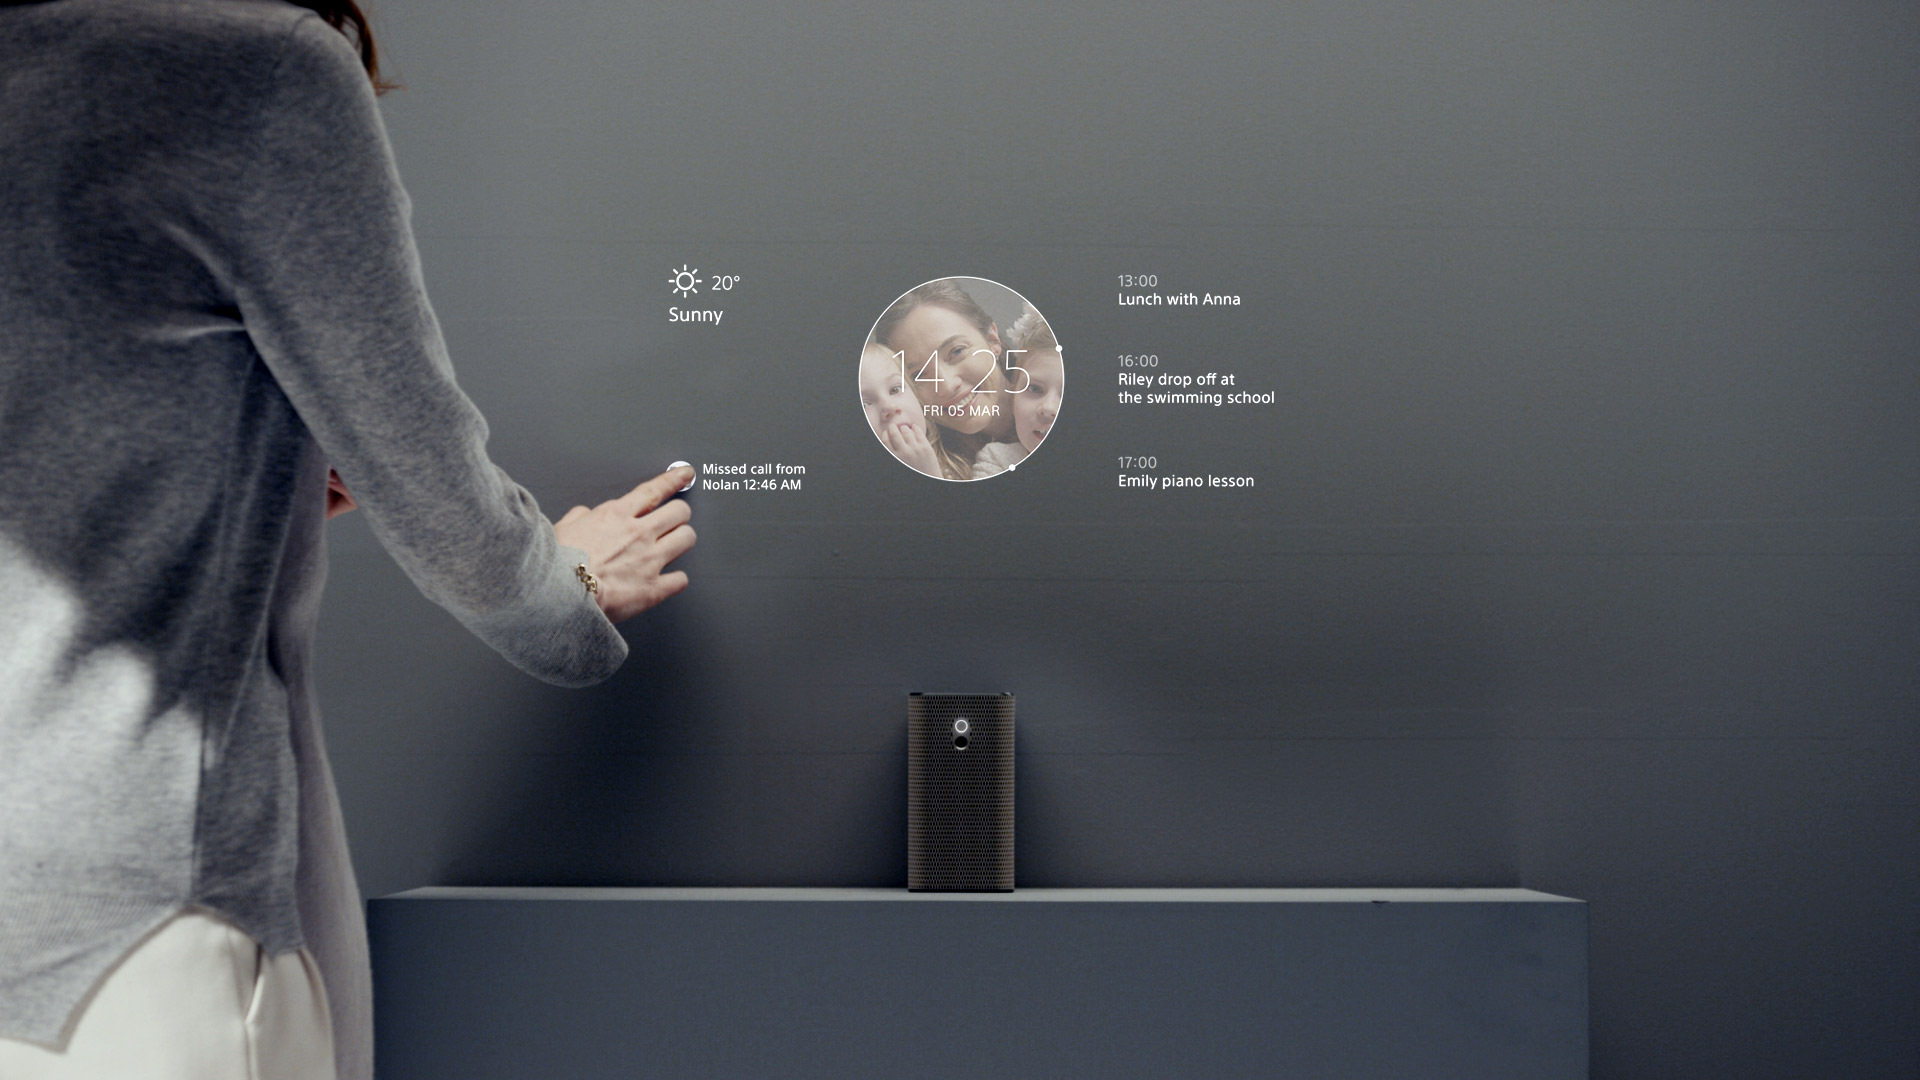 Sony Xperia Projector Mwc16